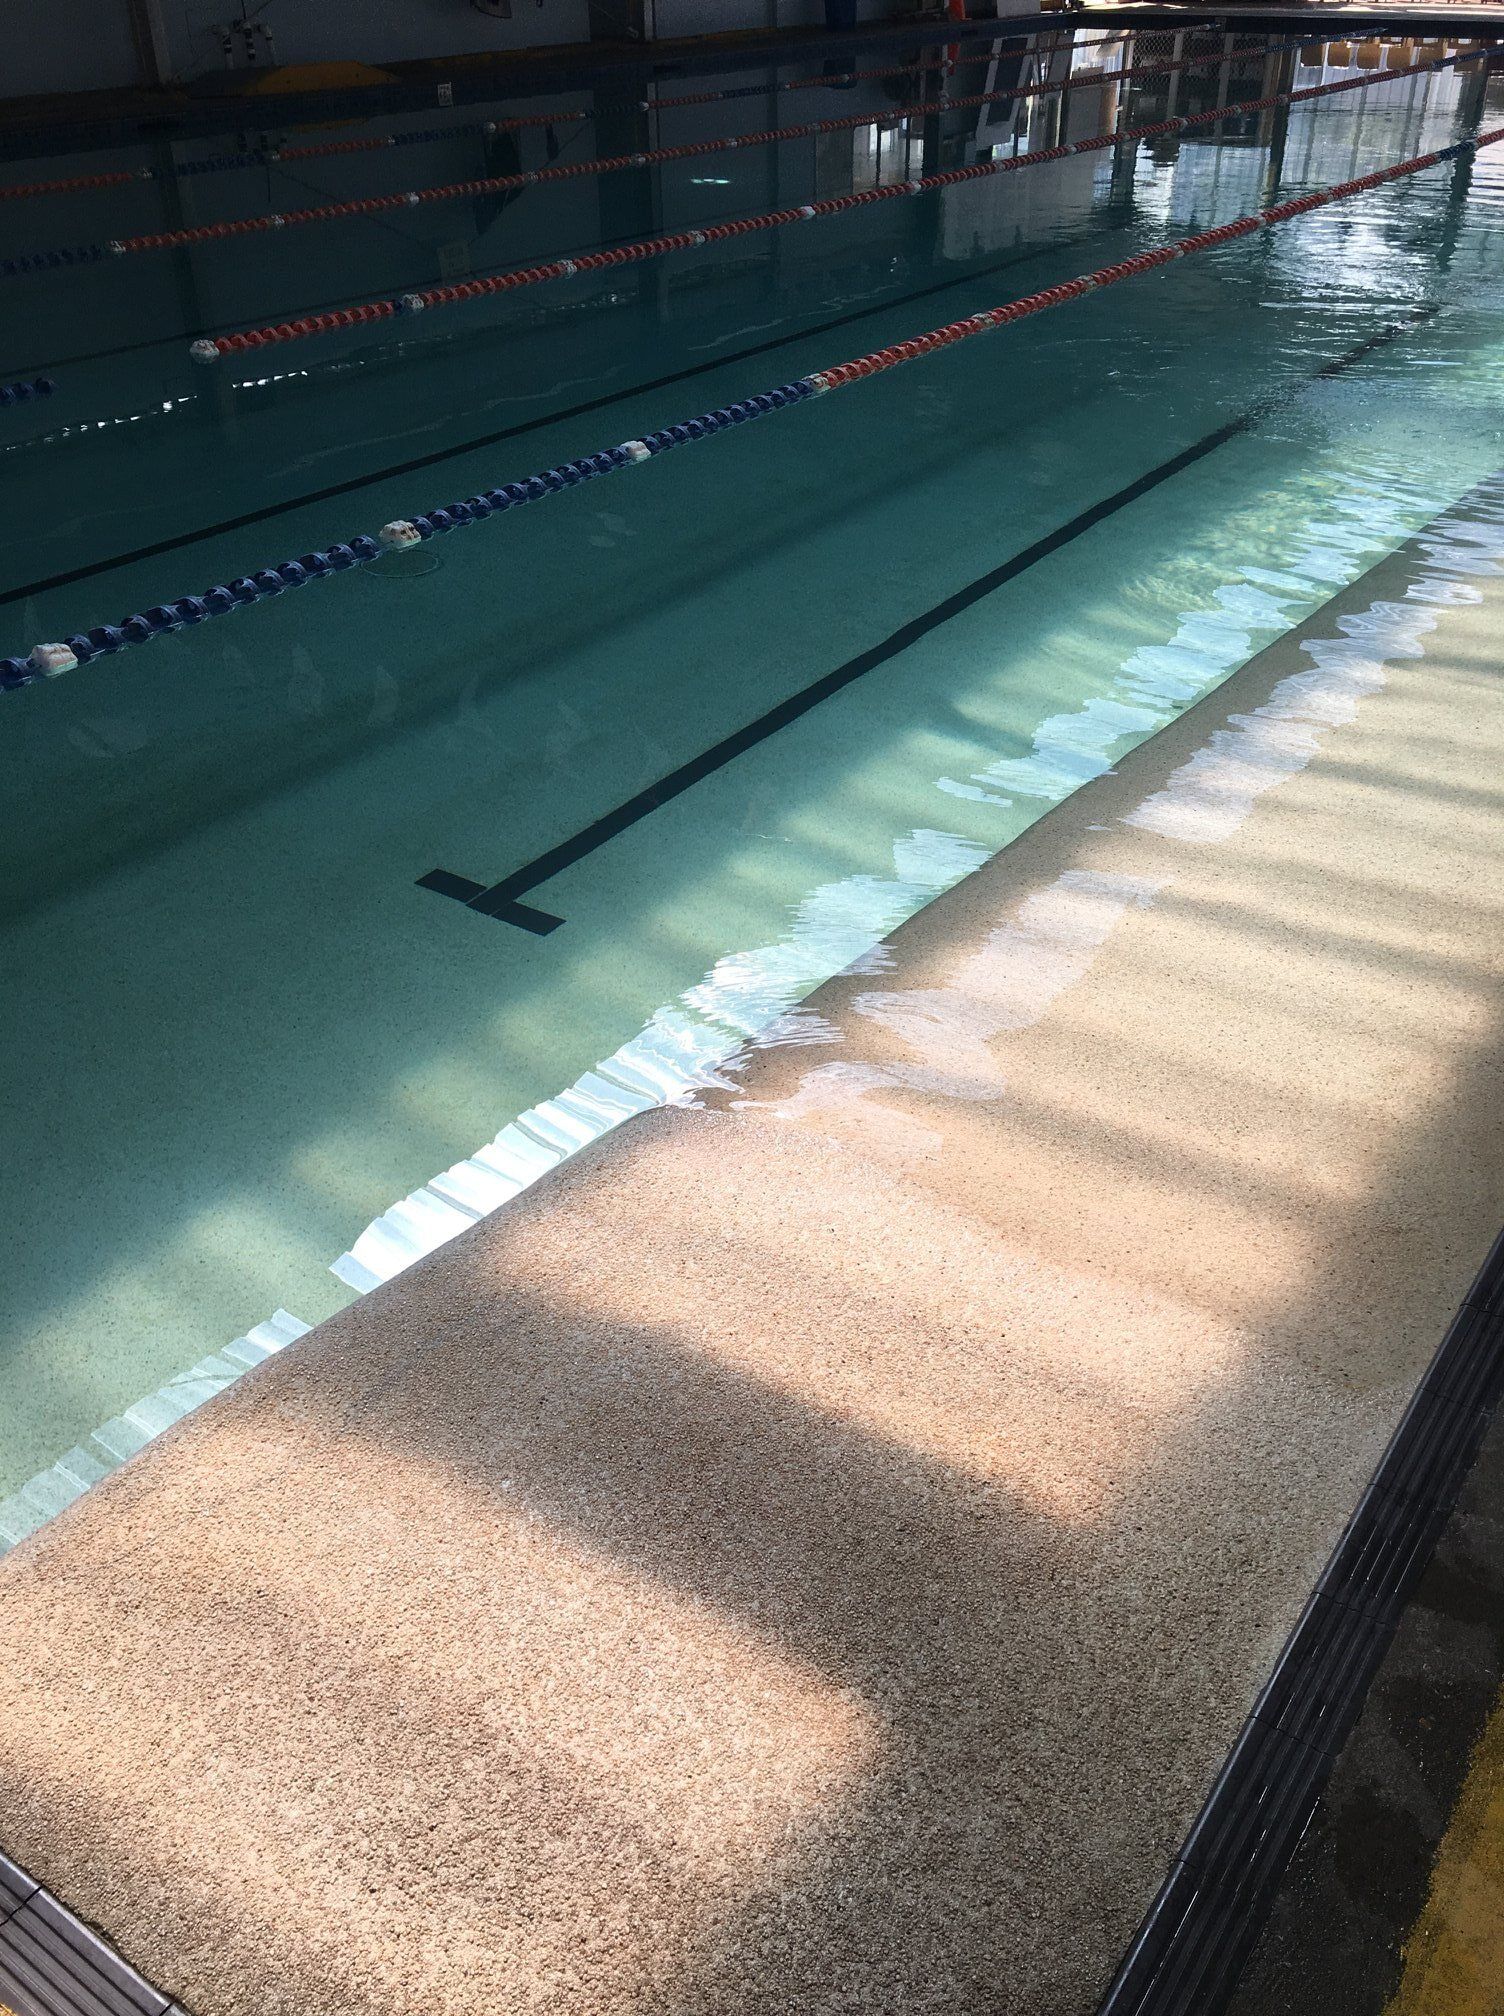 Pool Lane —Hydrotherapy in Croudance Bay, NSW